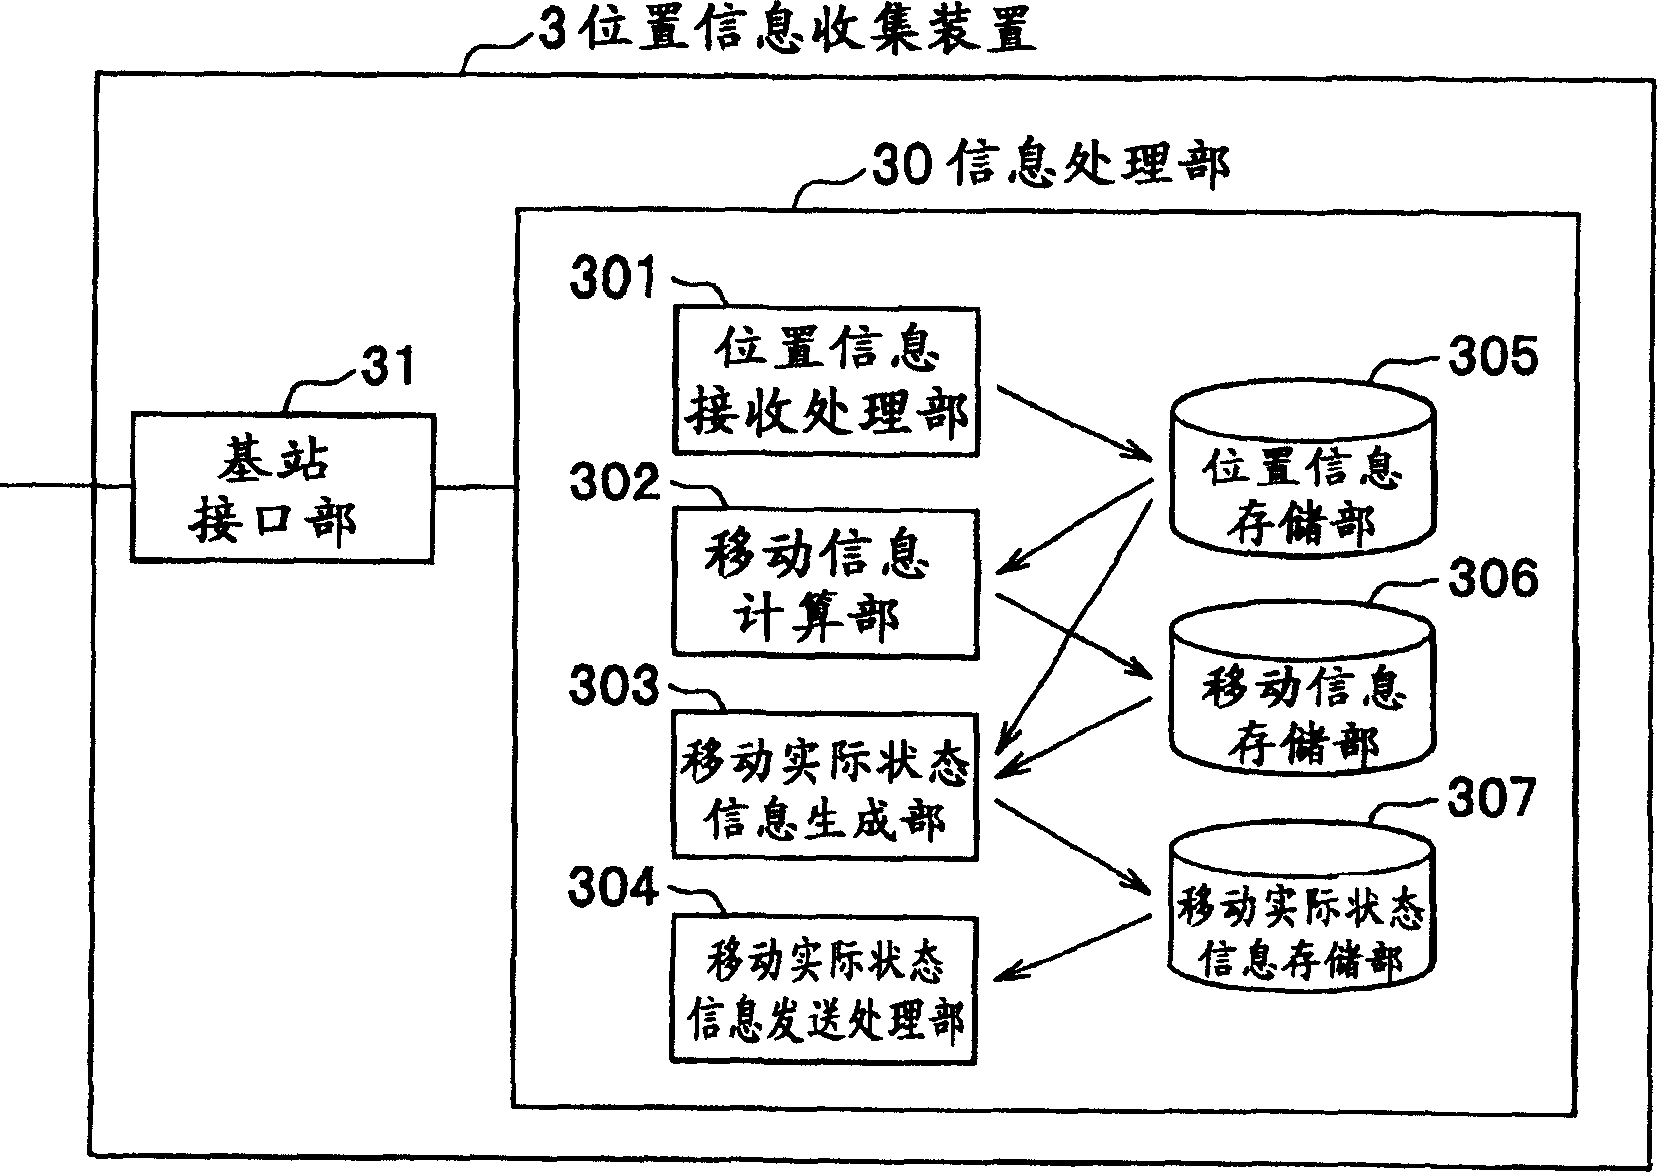 System and method for providing information, a location data collection system, and a car navigation system